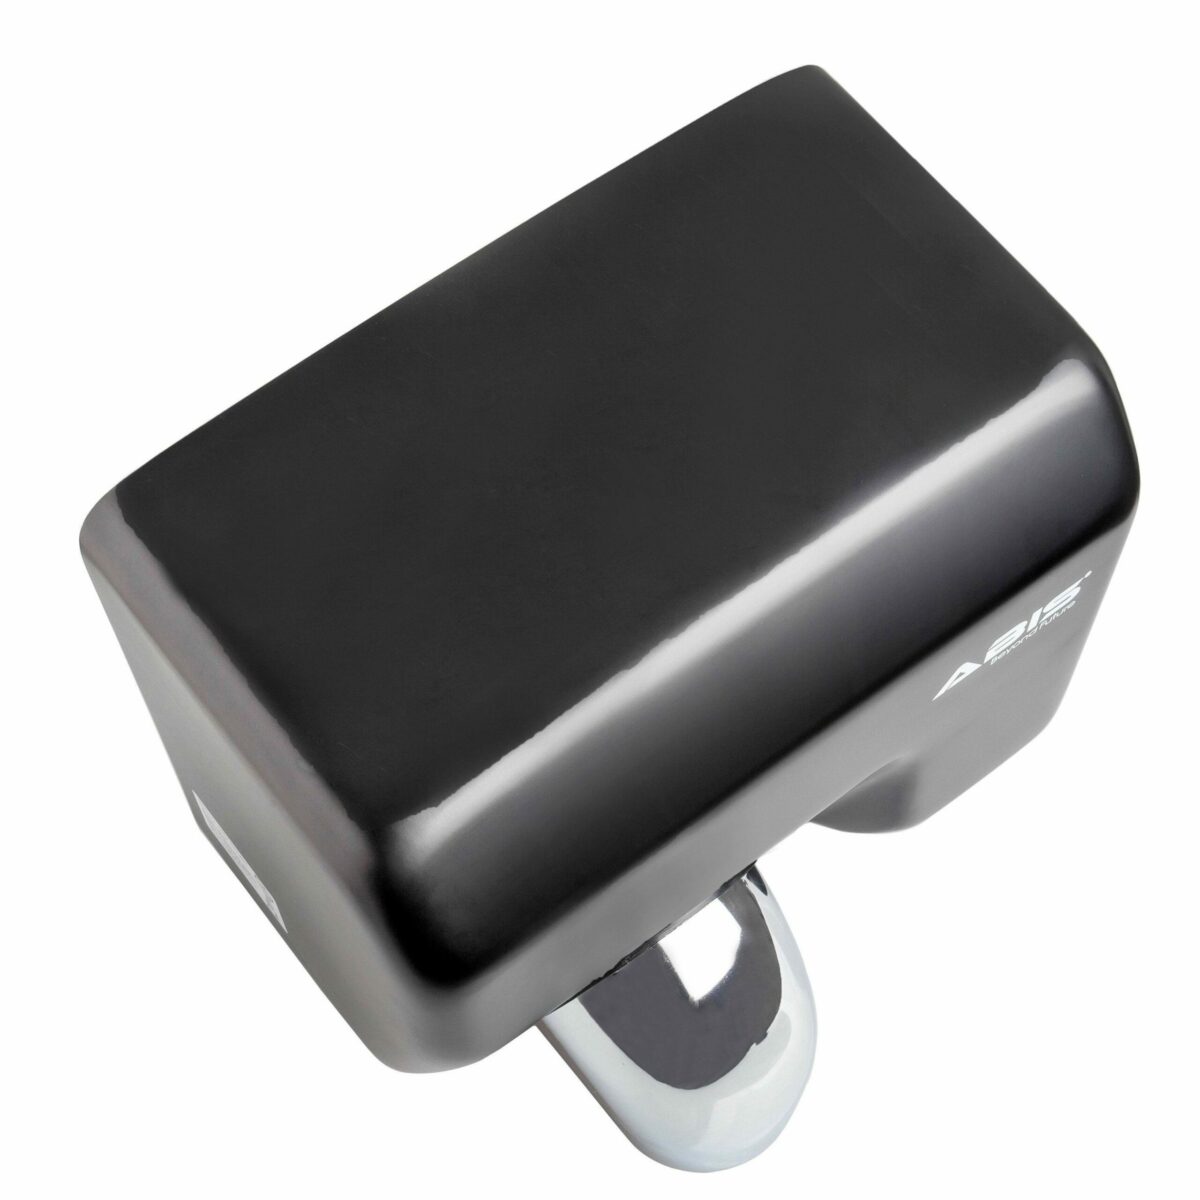 Storm Stainless Steel Commercial Hand Dryer - Black - ABIS